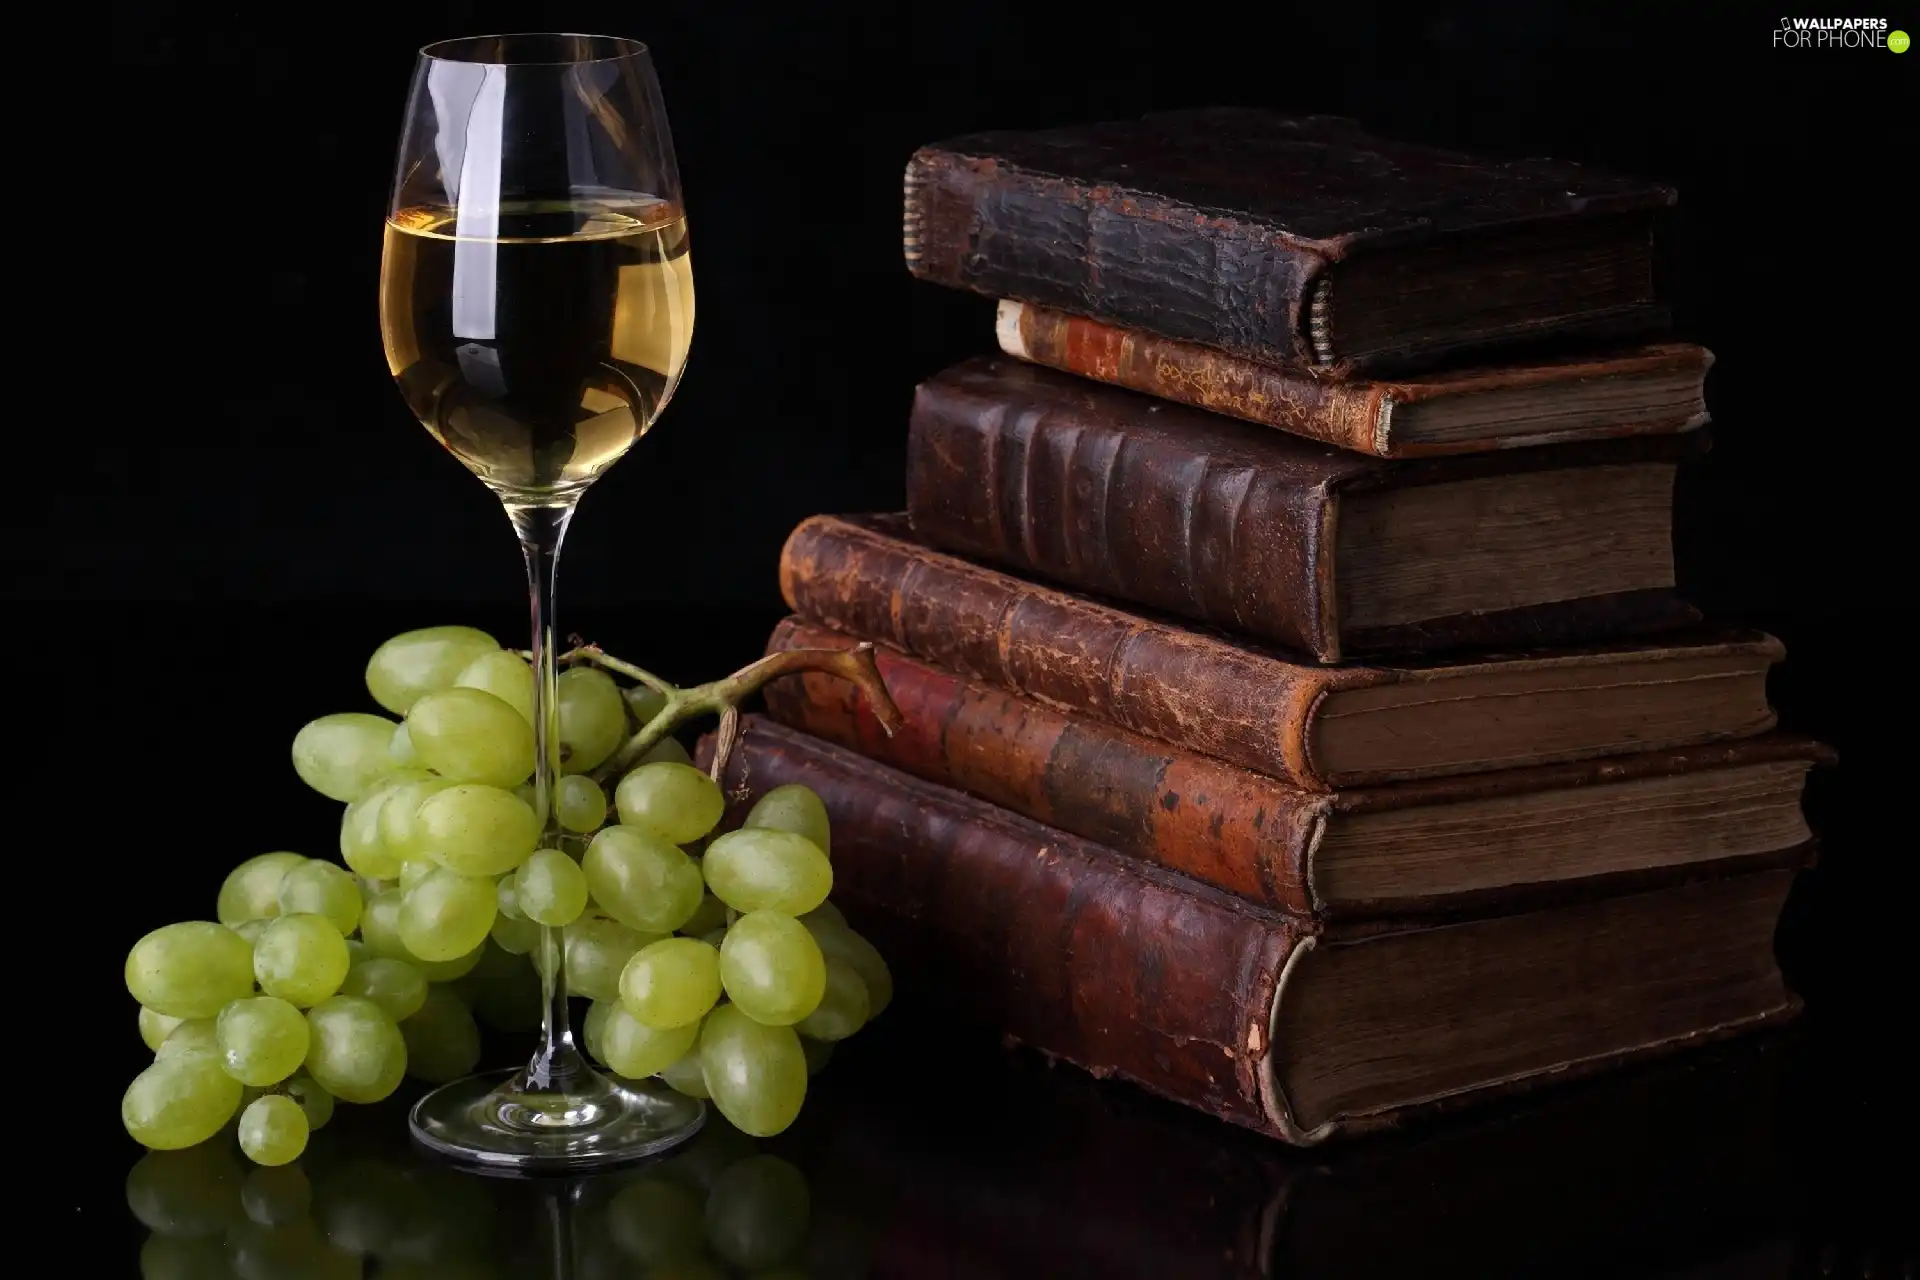 old, Grapes, Wine, Books